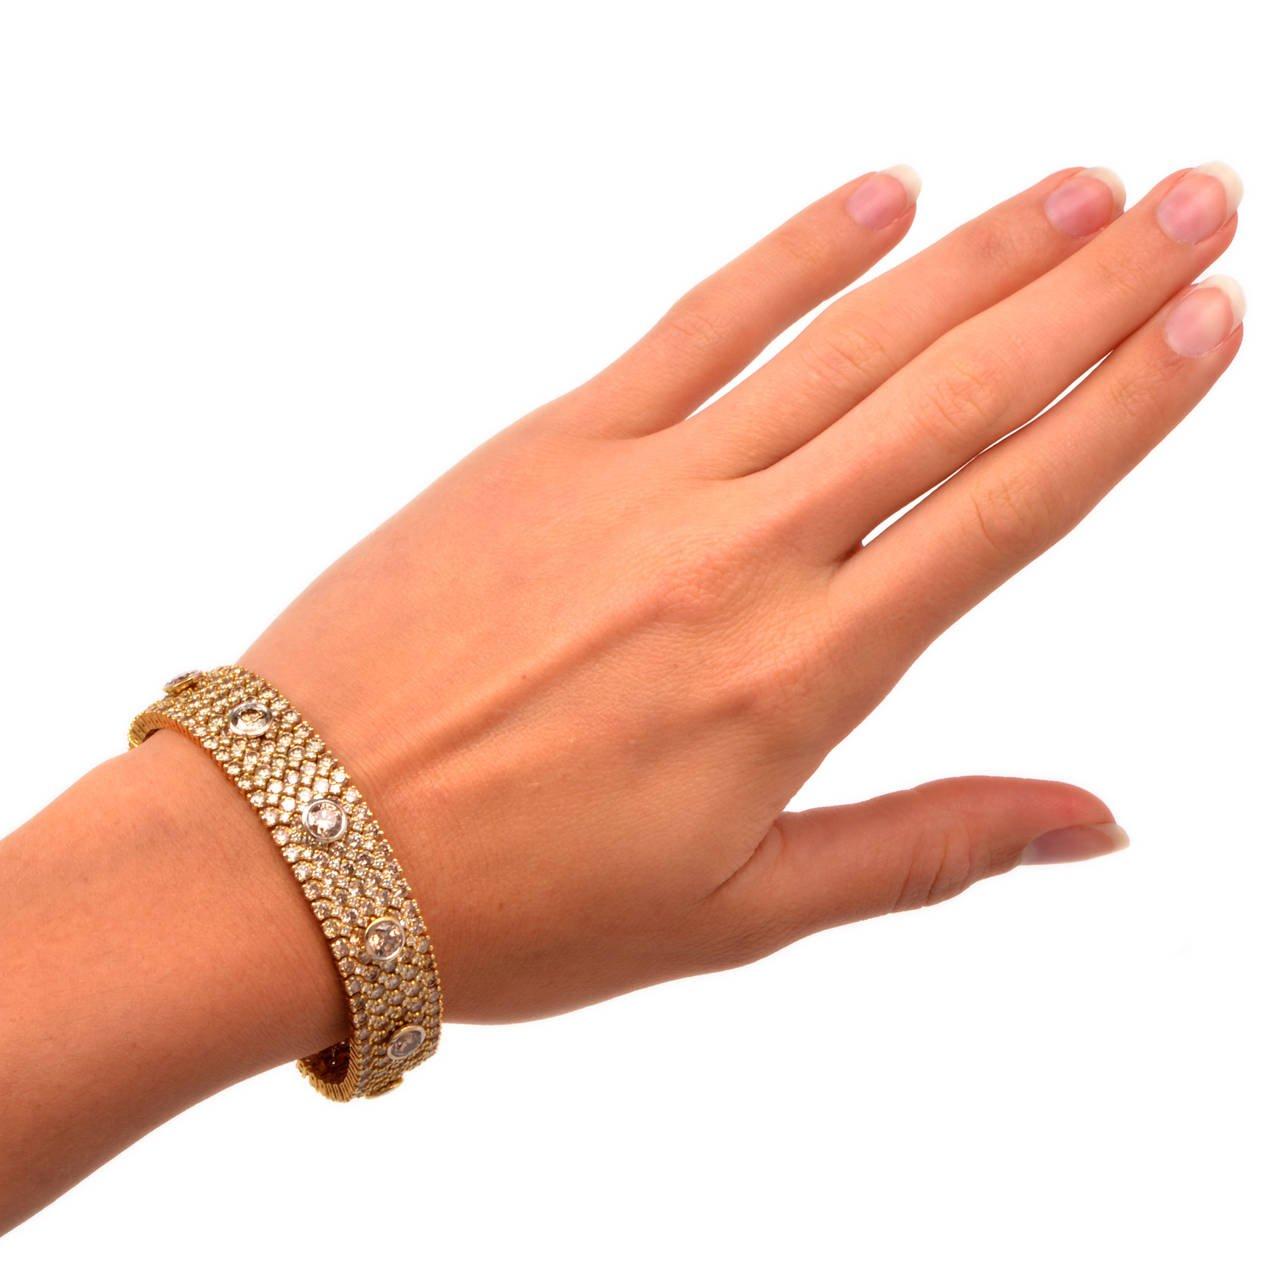 This masterfully designed 1980s bracelet with natural fancy brown-yellow diamonds is crafted in solid 18K yellow gold and embellished with an artistic mesh pattern. A total number of 9 fancy brown-yellow diamond collates of approx. 7.20 carats, in